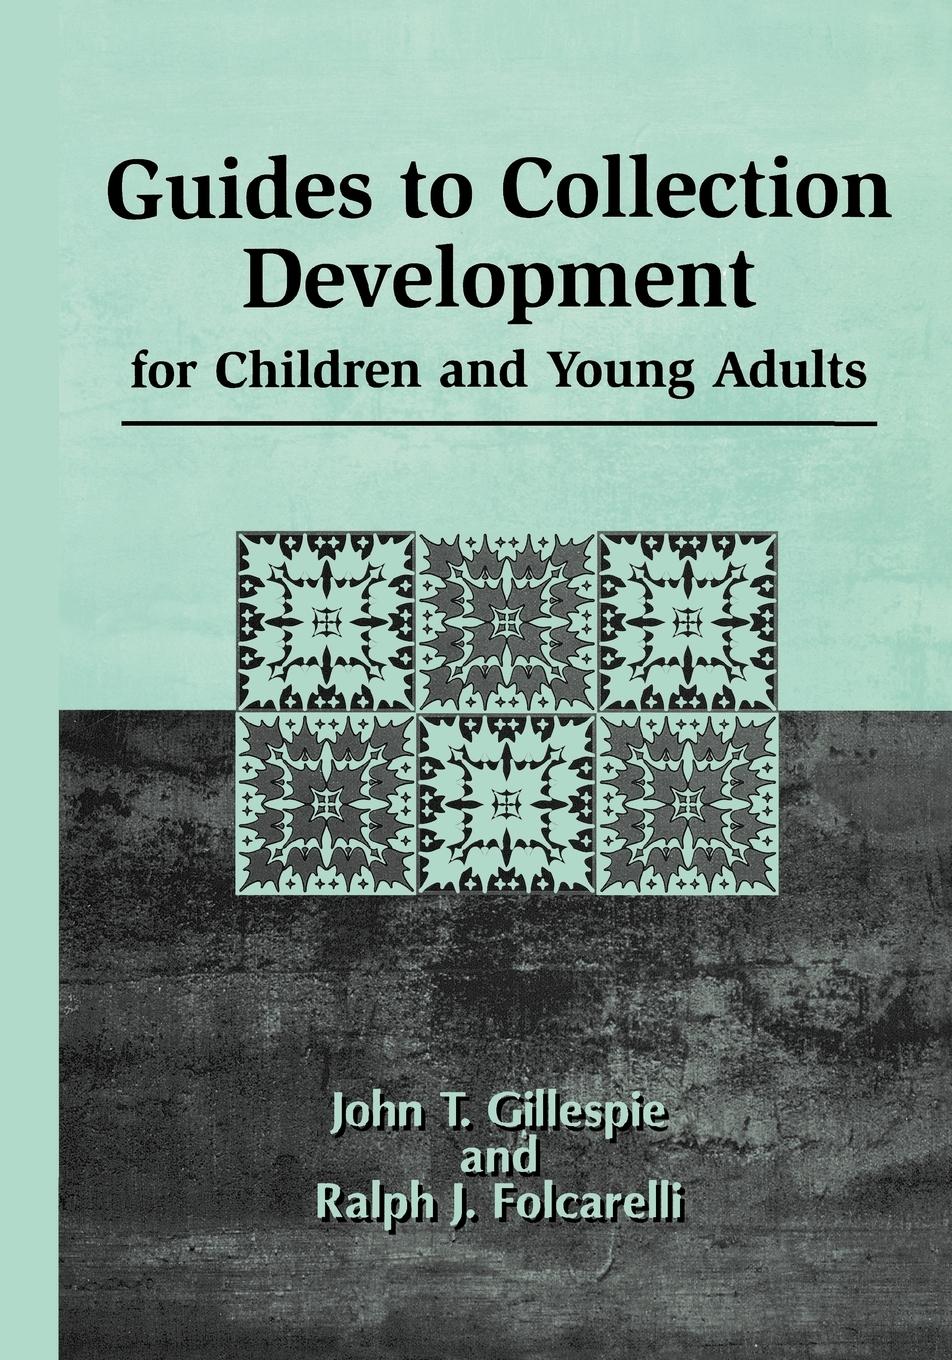 Guides to Collection Development for Children and Young Adults - Gillespie, John Thomas Folcarelli, Ralph J.